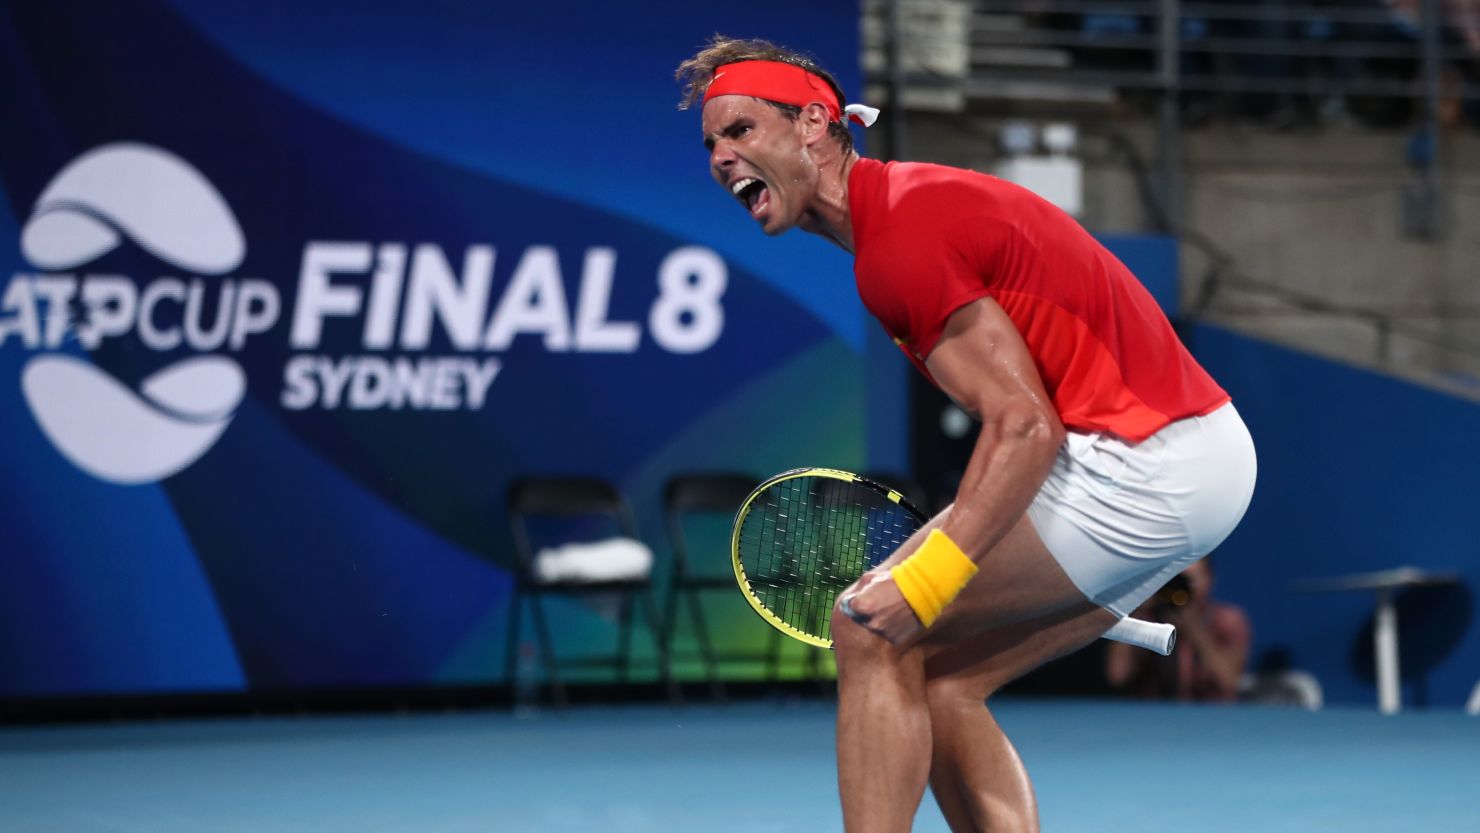 Rafael Nadal rallied to set up a 55th meeting with Novak Djokovic at the ATP Cup finals.